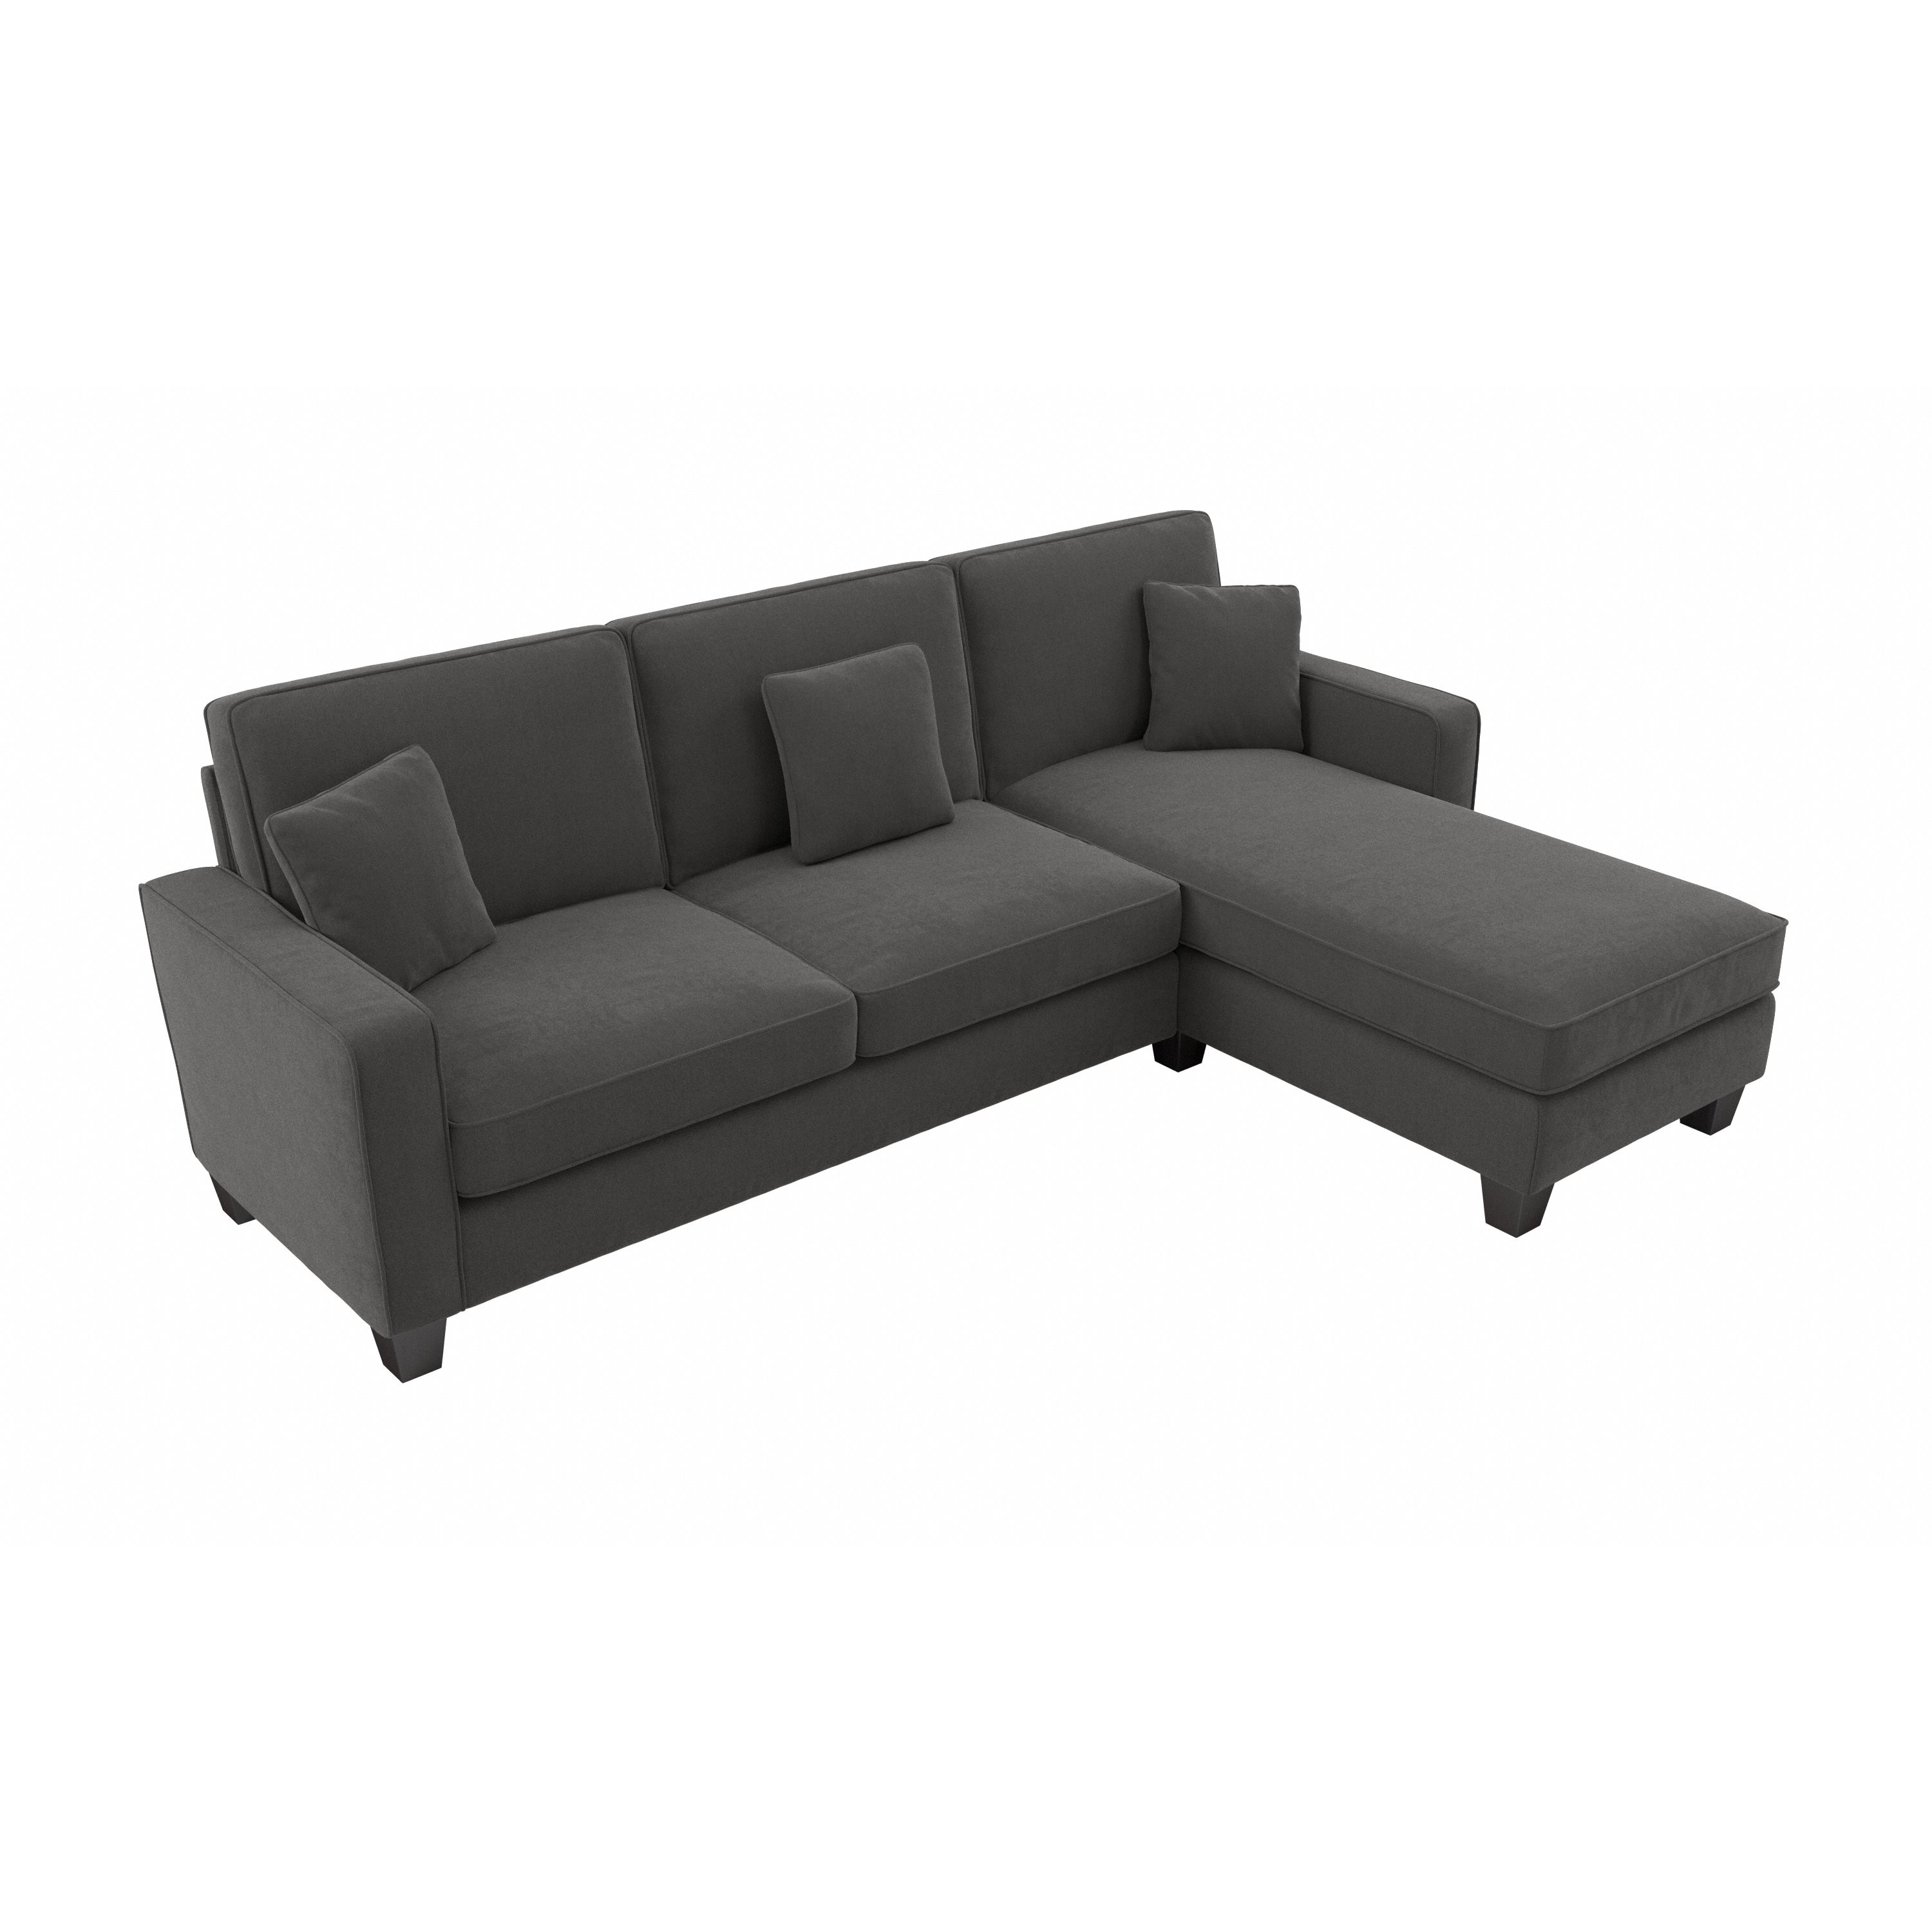 Shop Bush Furniture Stockton 102W Sectional Couch with Reversible Chaise Lounge 02 SNY102SCGH-03K #color_charcoal gray herringbone fabr